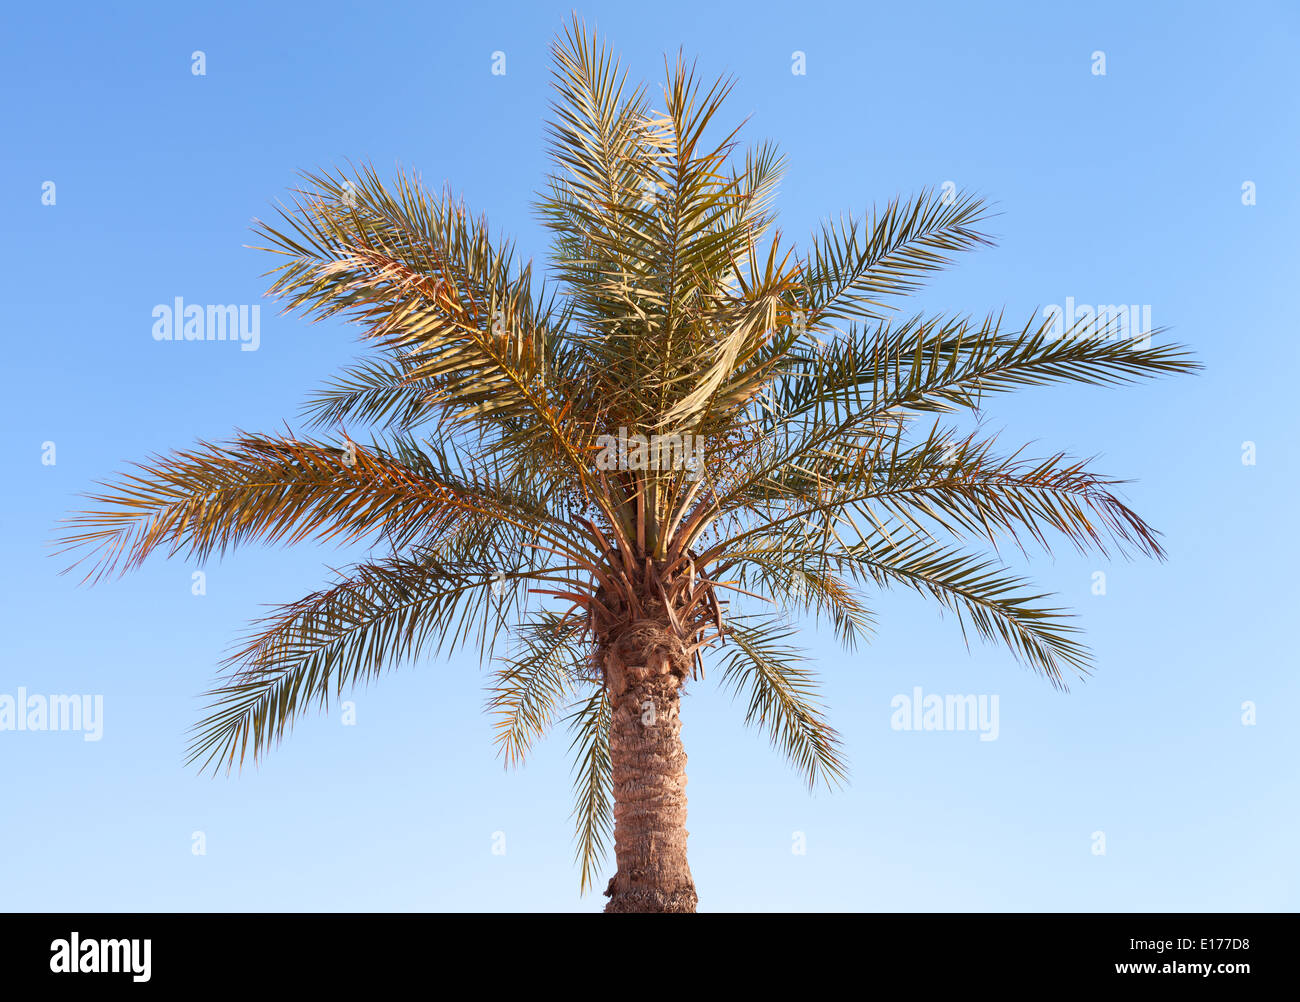 Date palm tree on clear blue sky background Stock Photo